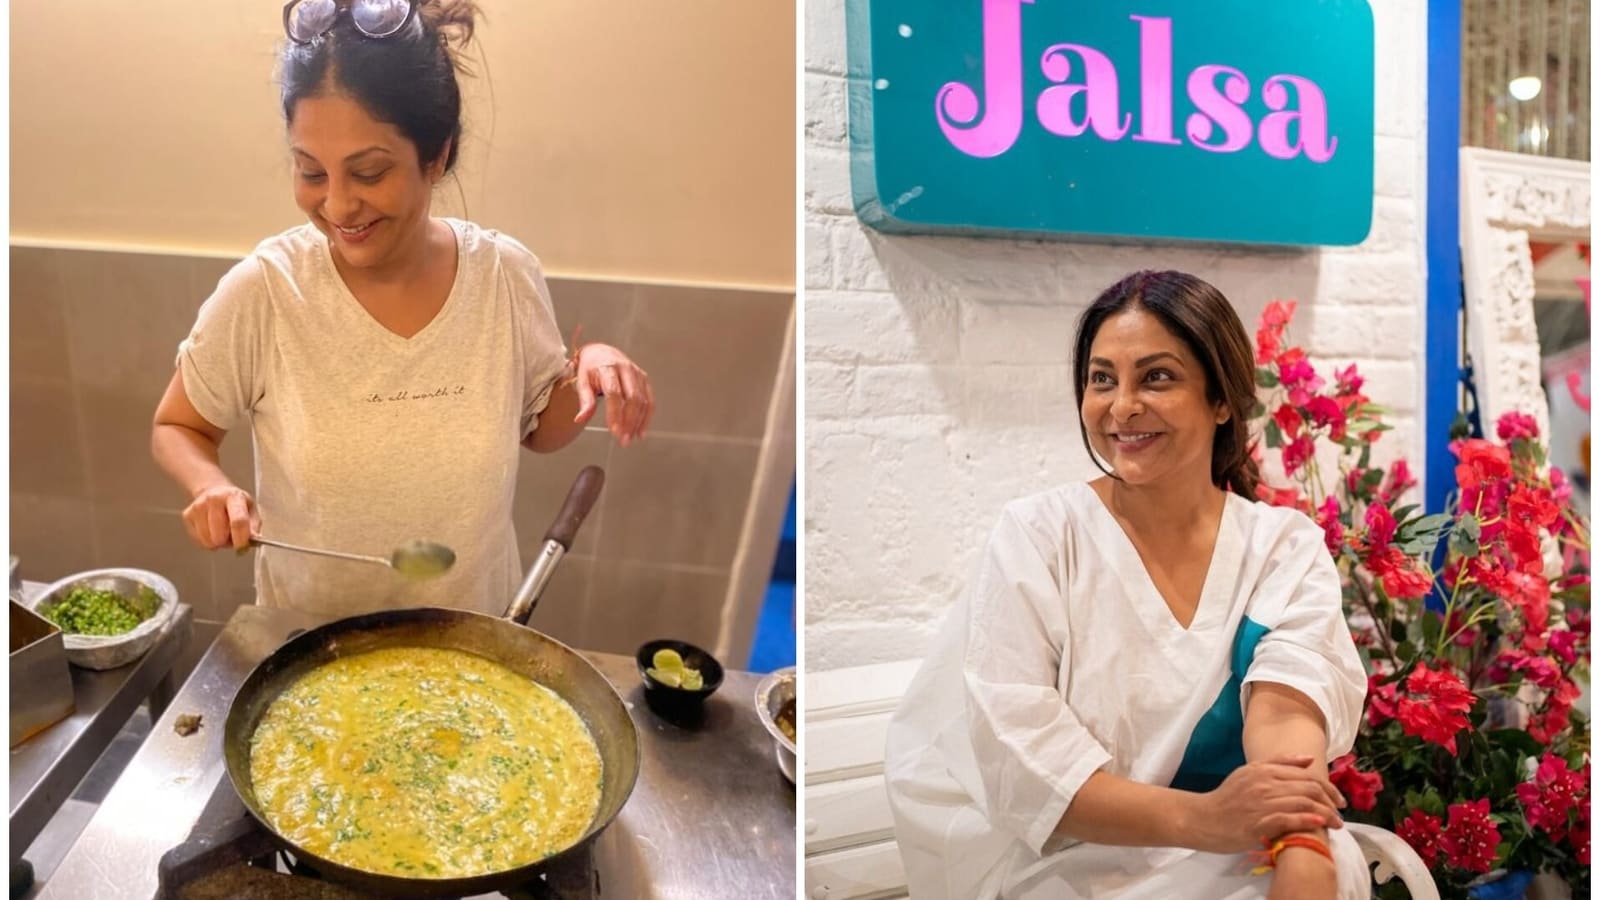 Shefali Shah’s new restaurant Jalsa has hand-painted walls, recipes from her kitchen. See photos